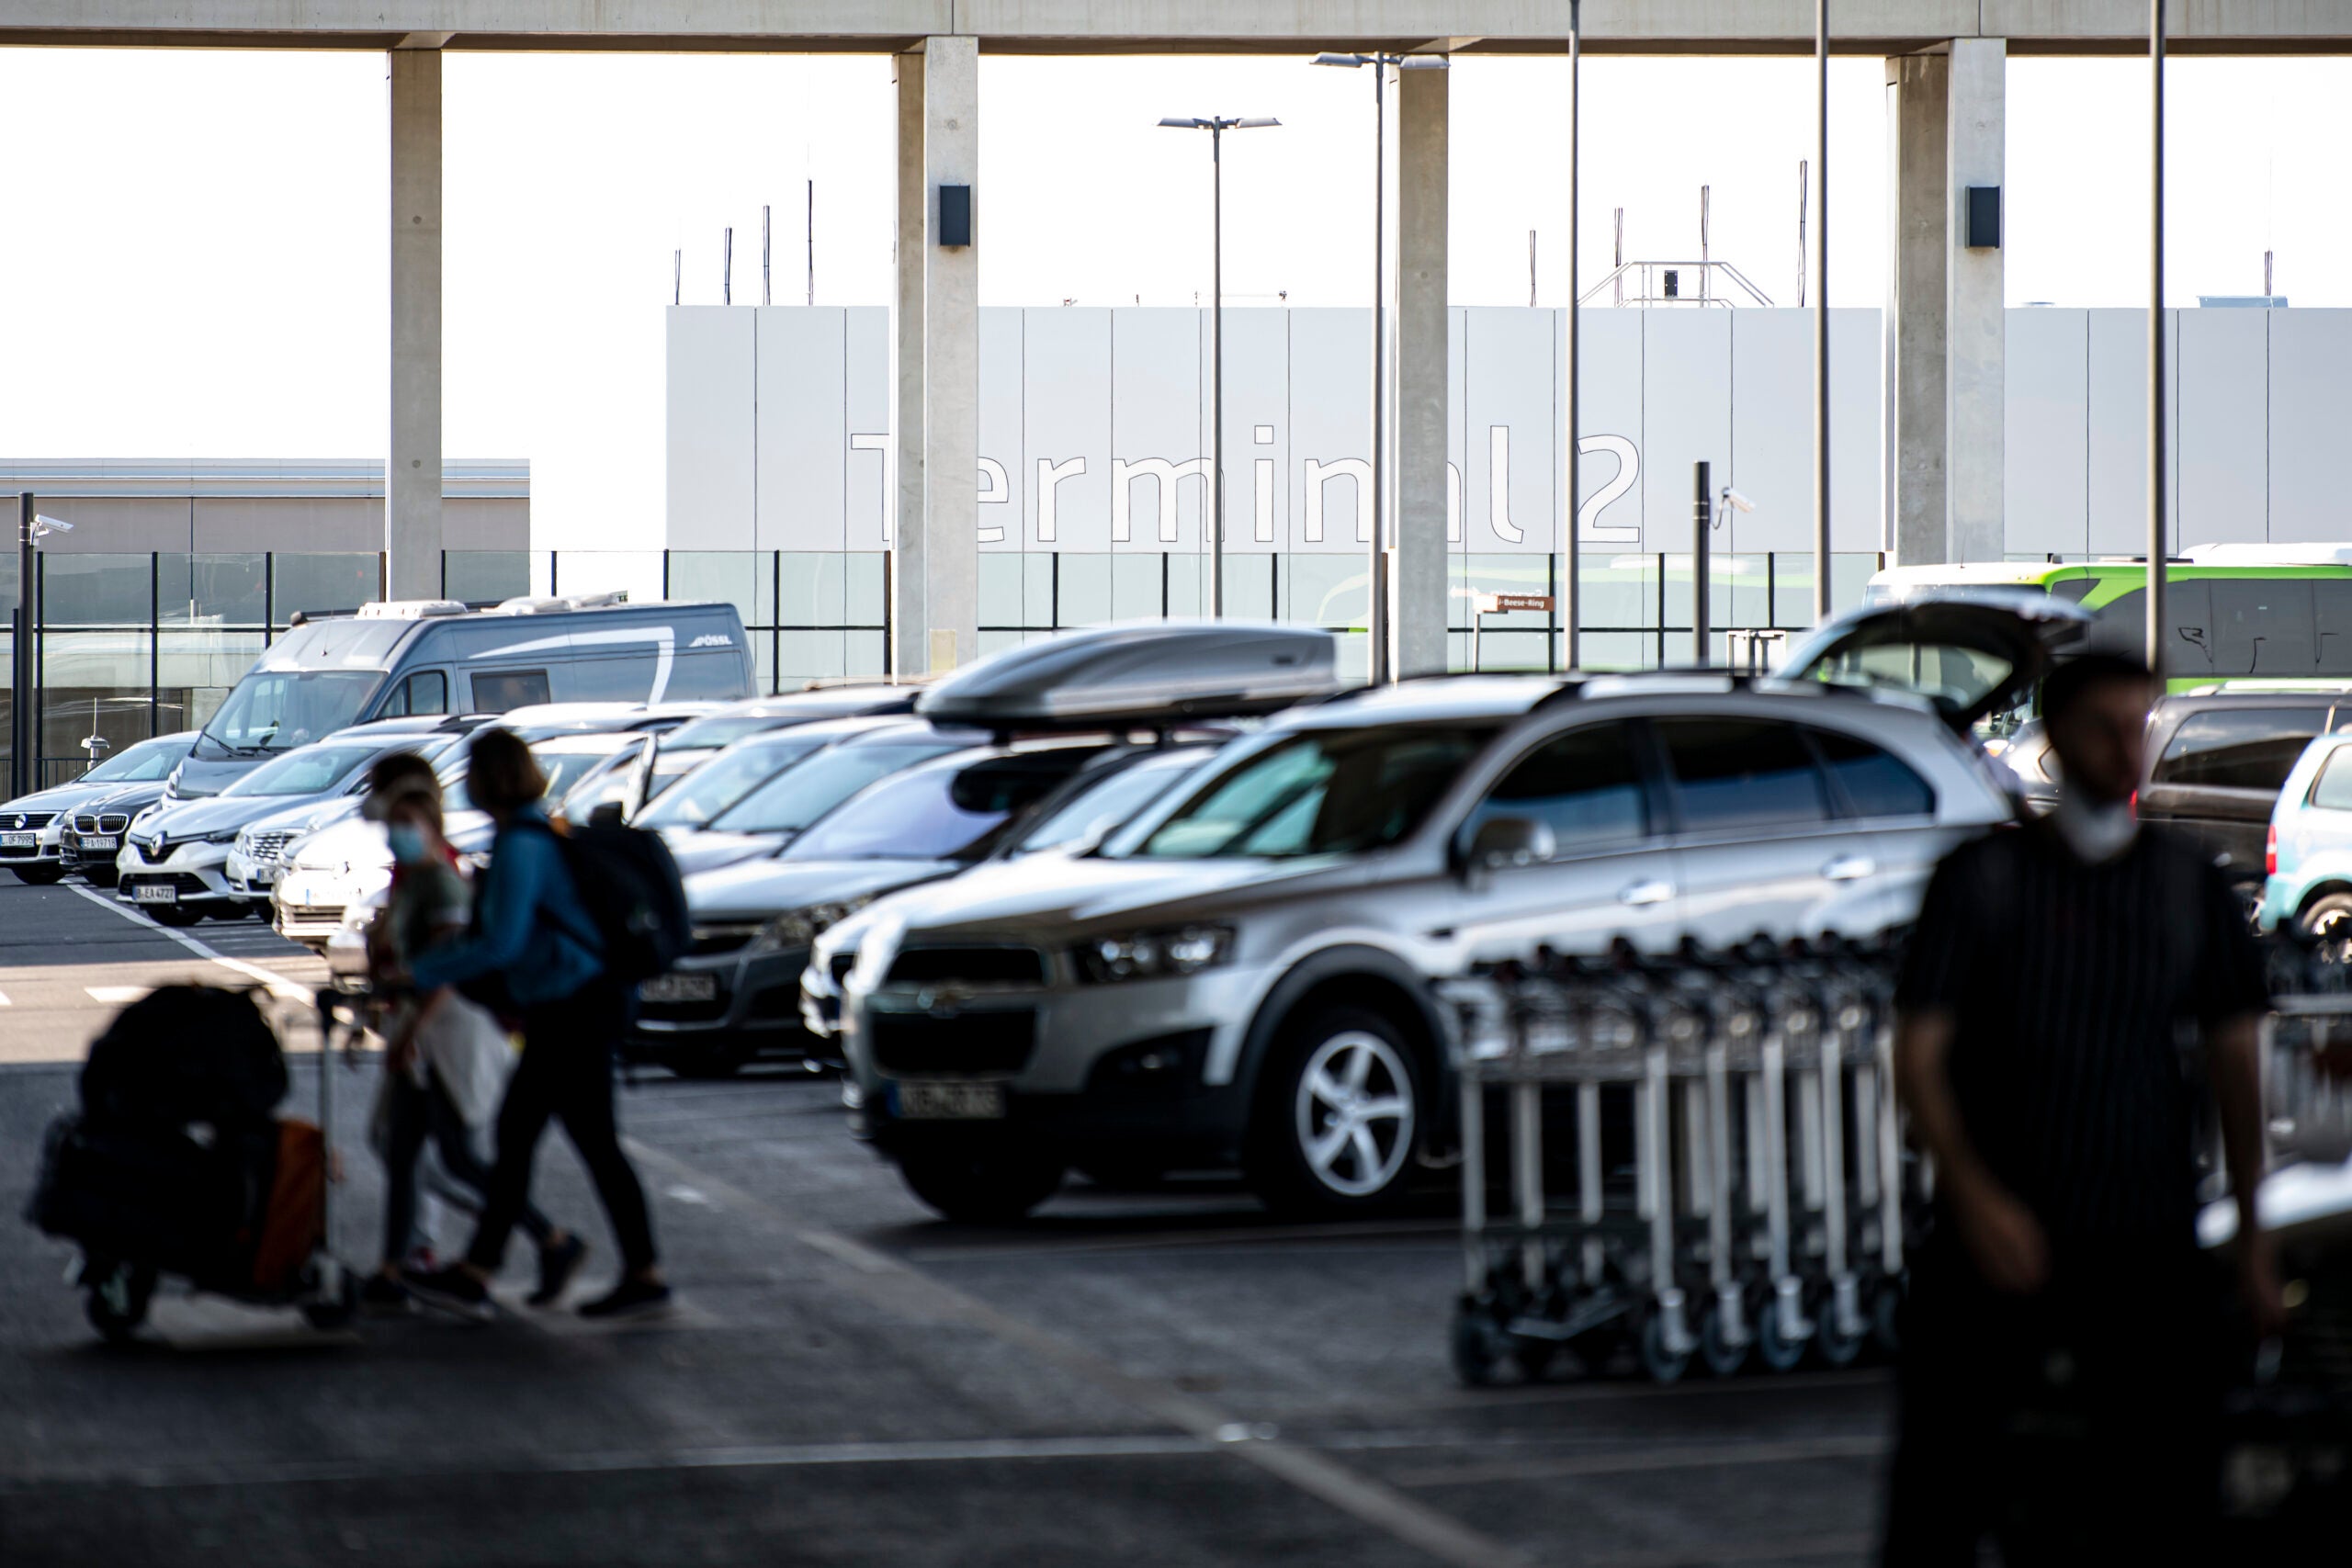 Here Are 4 Reasons Why Airport Parking Can Make Your Trip Worry-Free